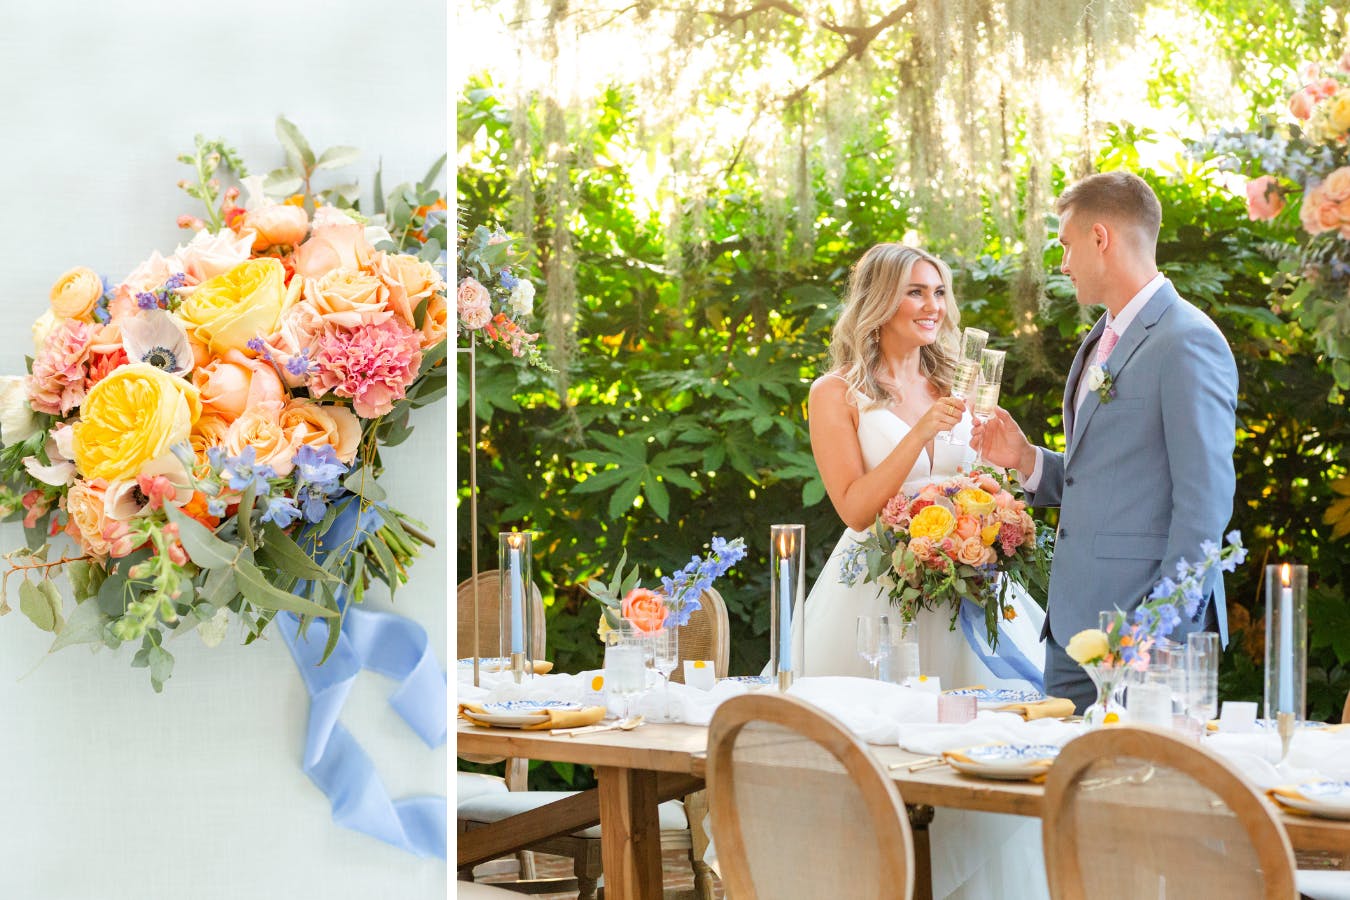 Cheerful bouquets pair with elevated tablescapes for a stylish garden wedding that’s also playful. | PartySlate